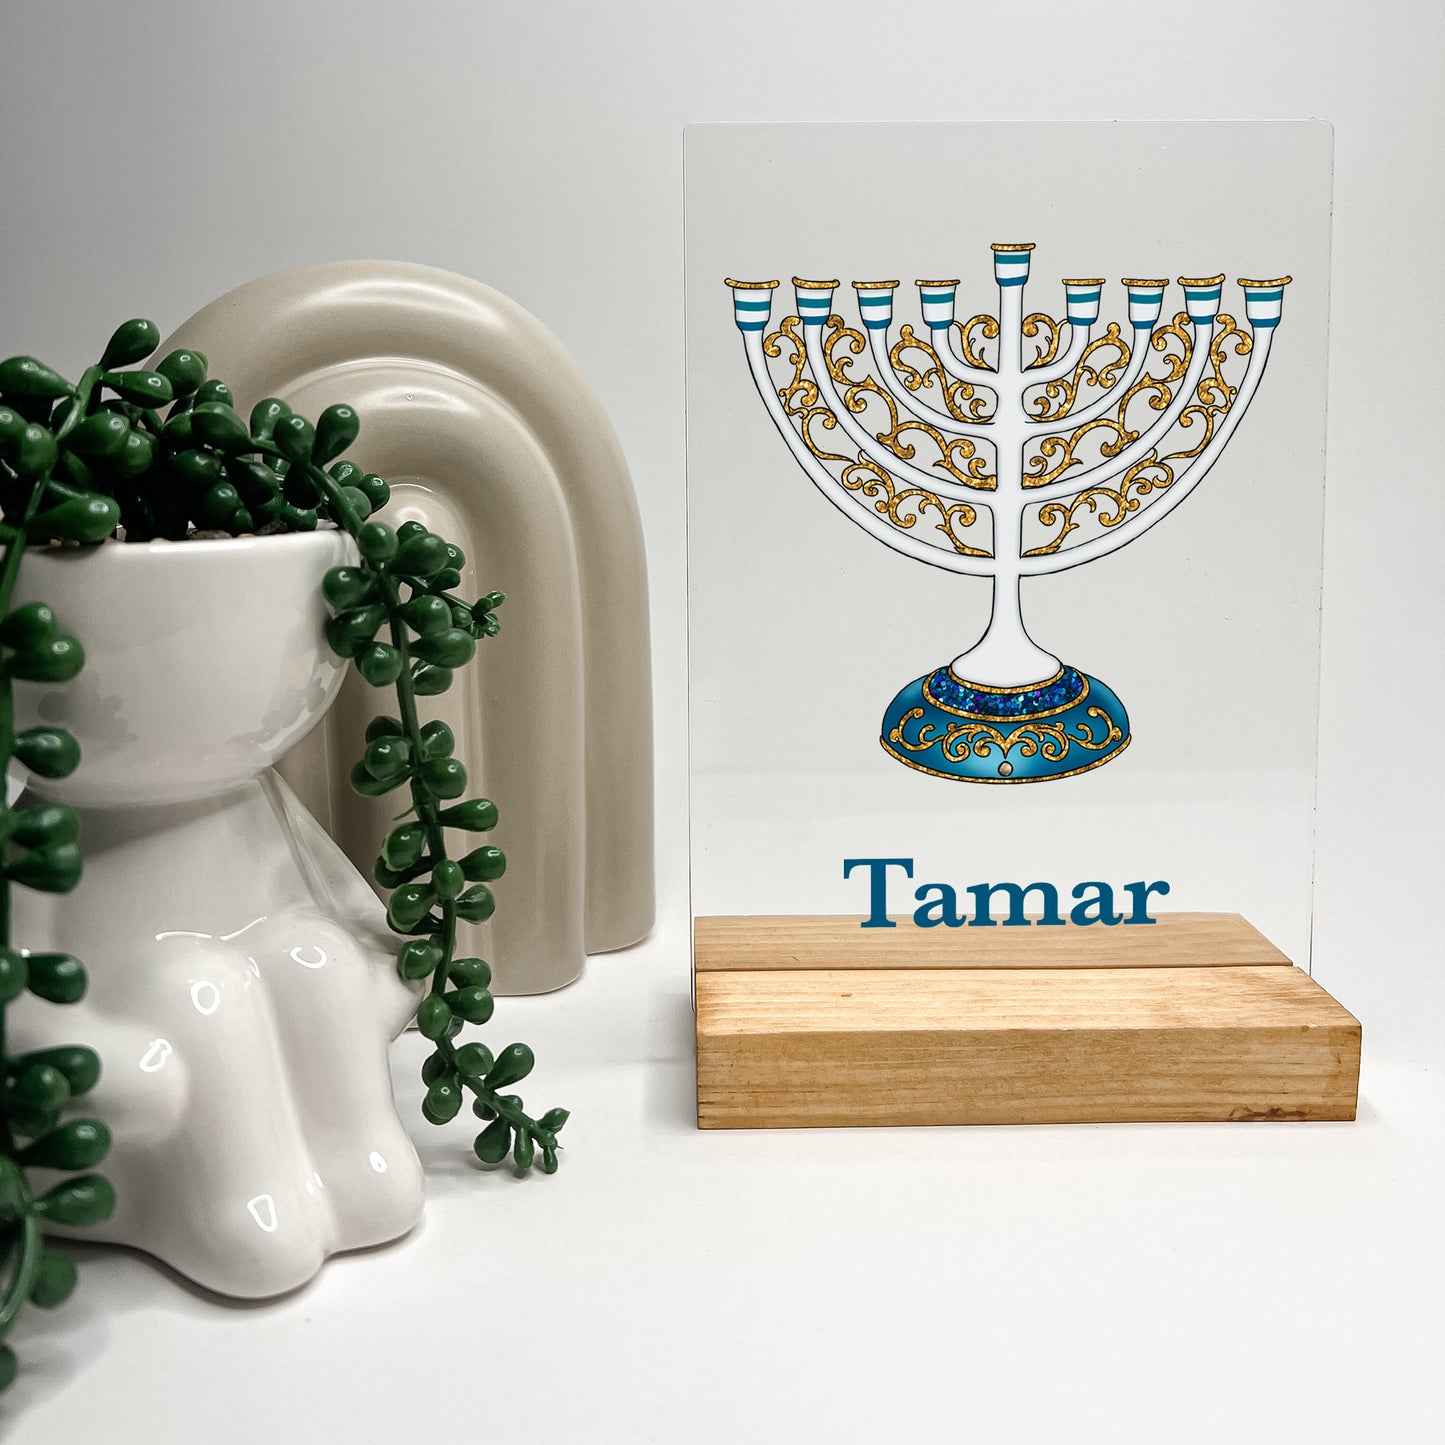 Personalized Menorah Judaica Wood Base Desk Table Stand